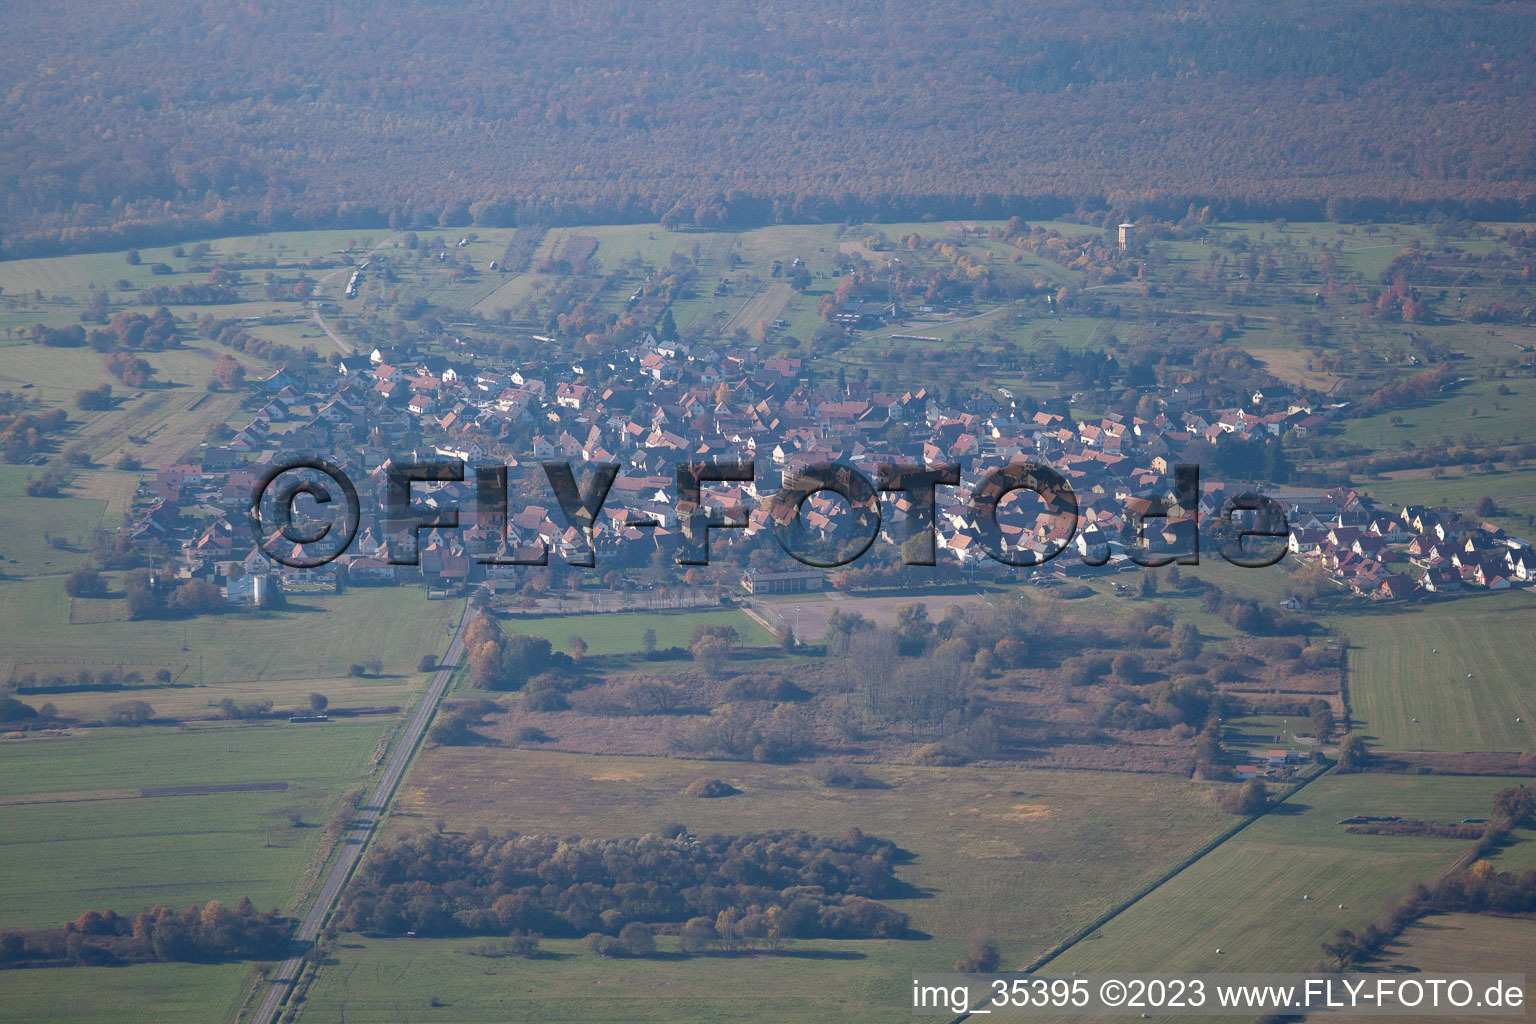 District Büchelberg in Wörth am Rhein in the state Rhineland-Palatinate, Germany from the drone perspective